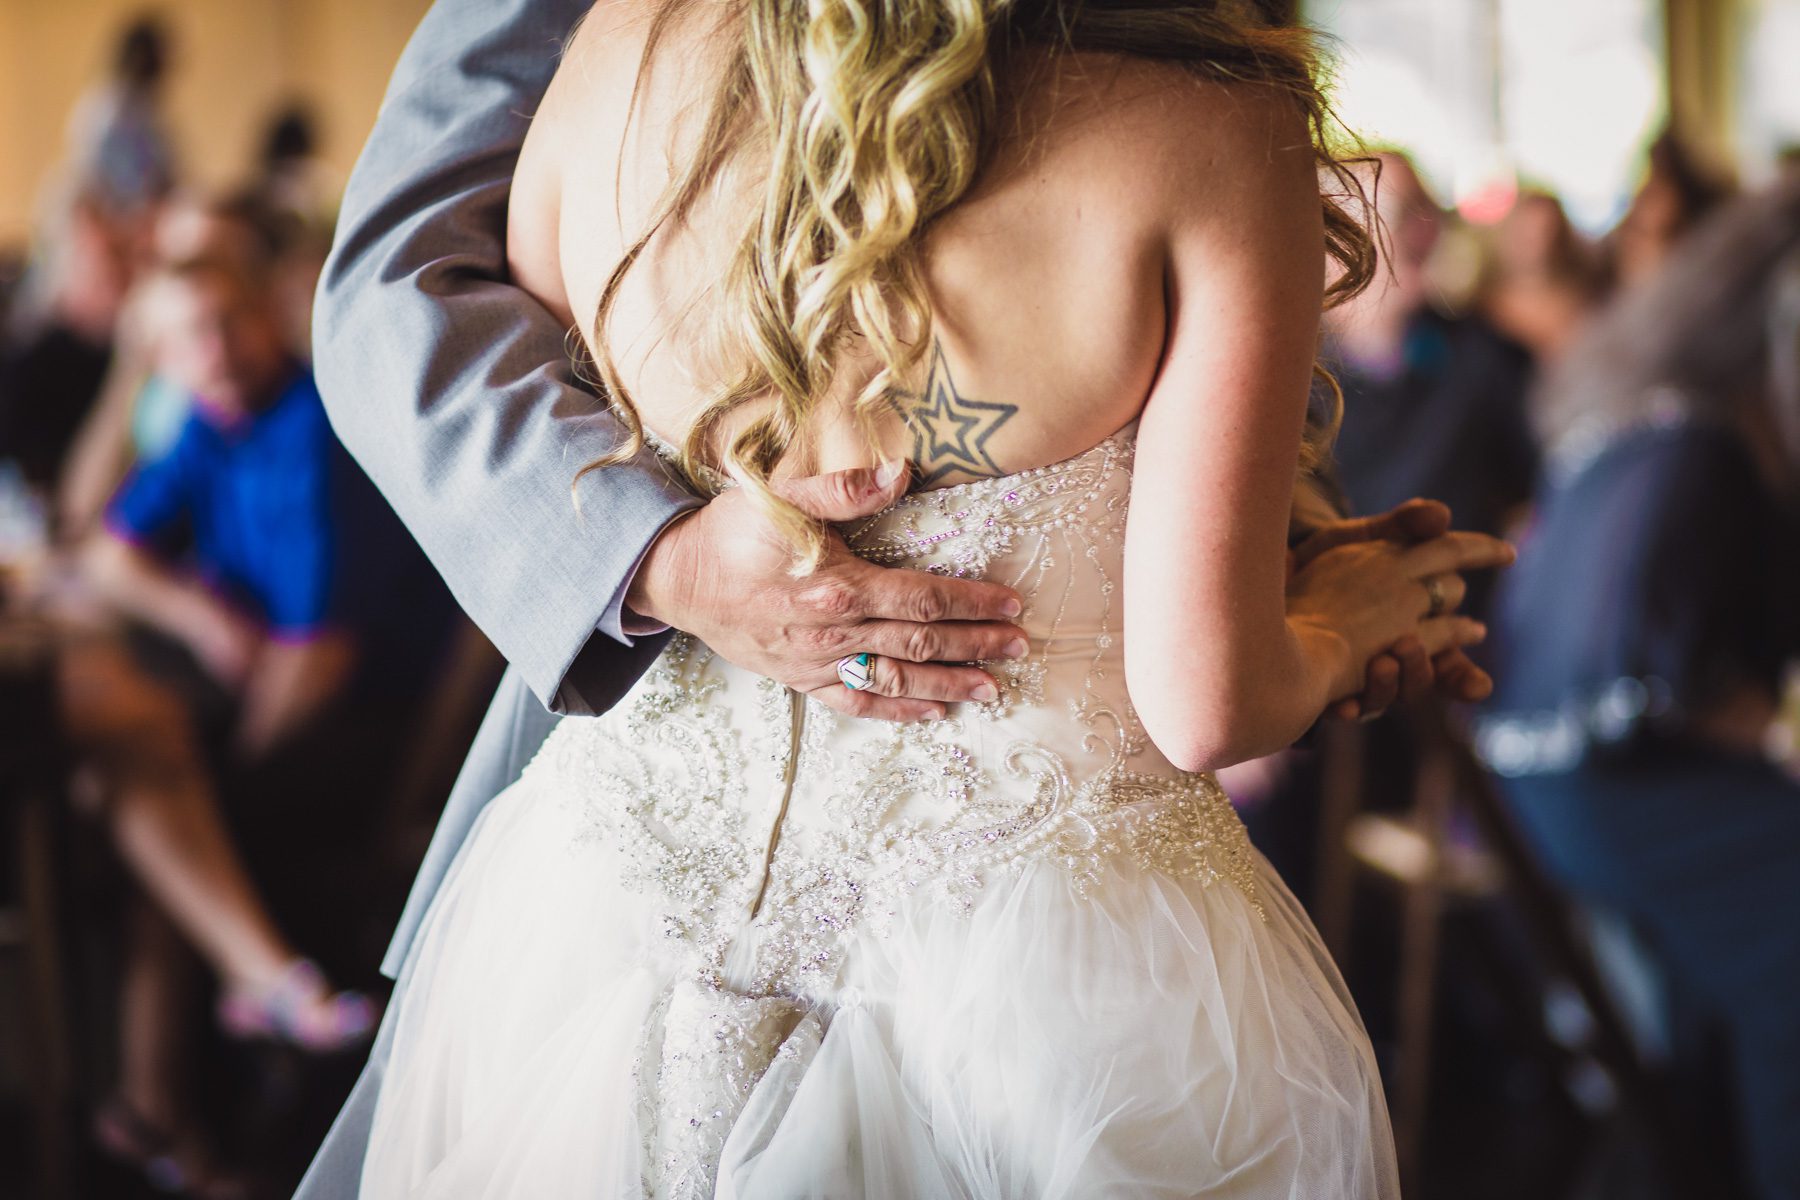 bride and groom first dance reception Old Glory Distilling Co. Clarksville, TN 